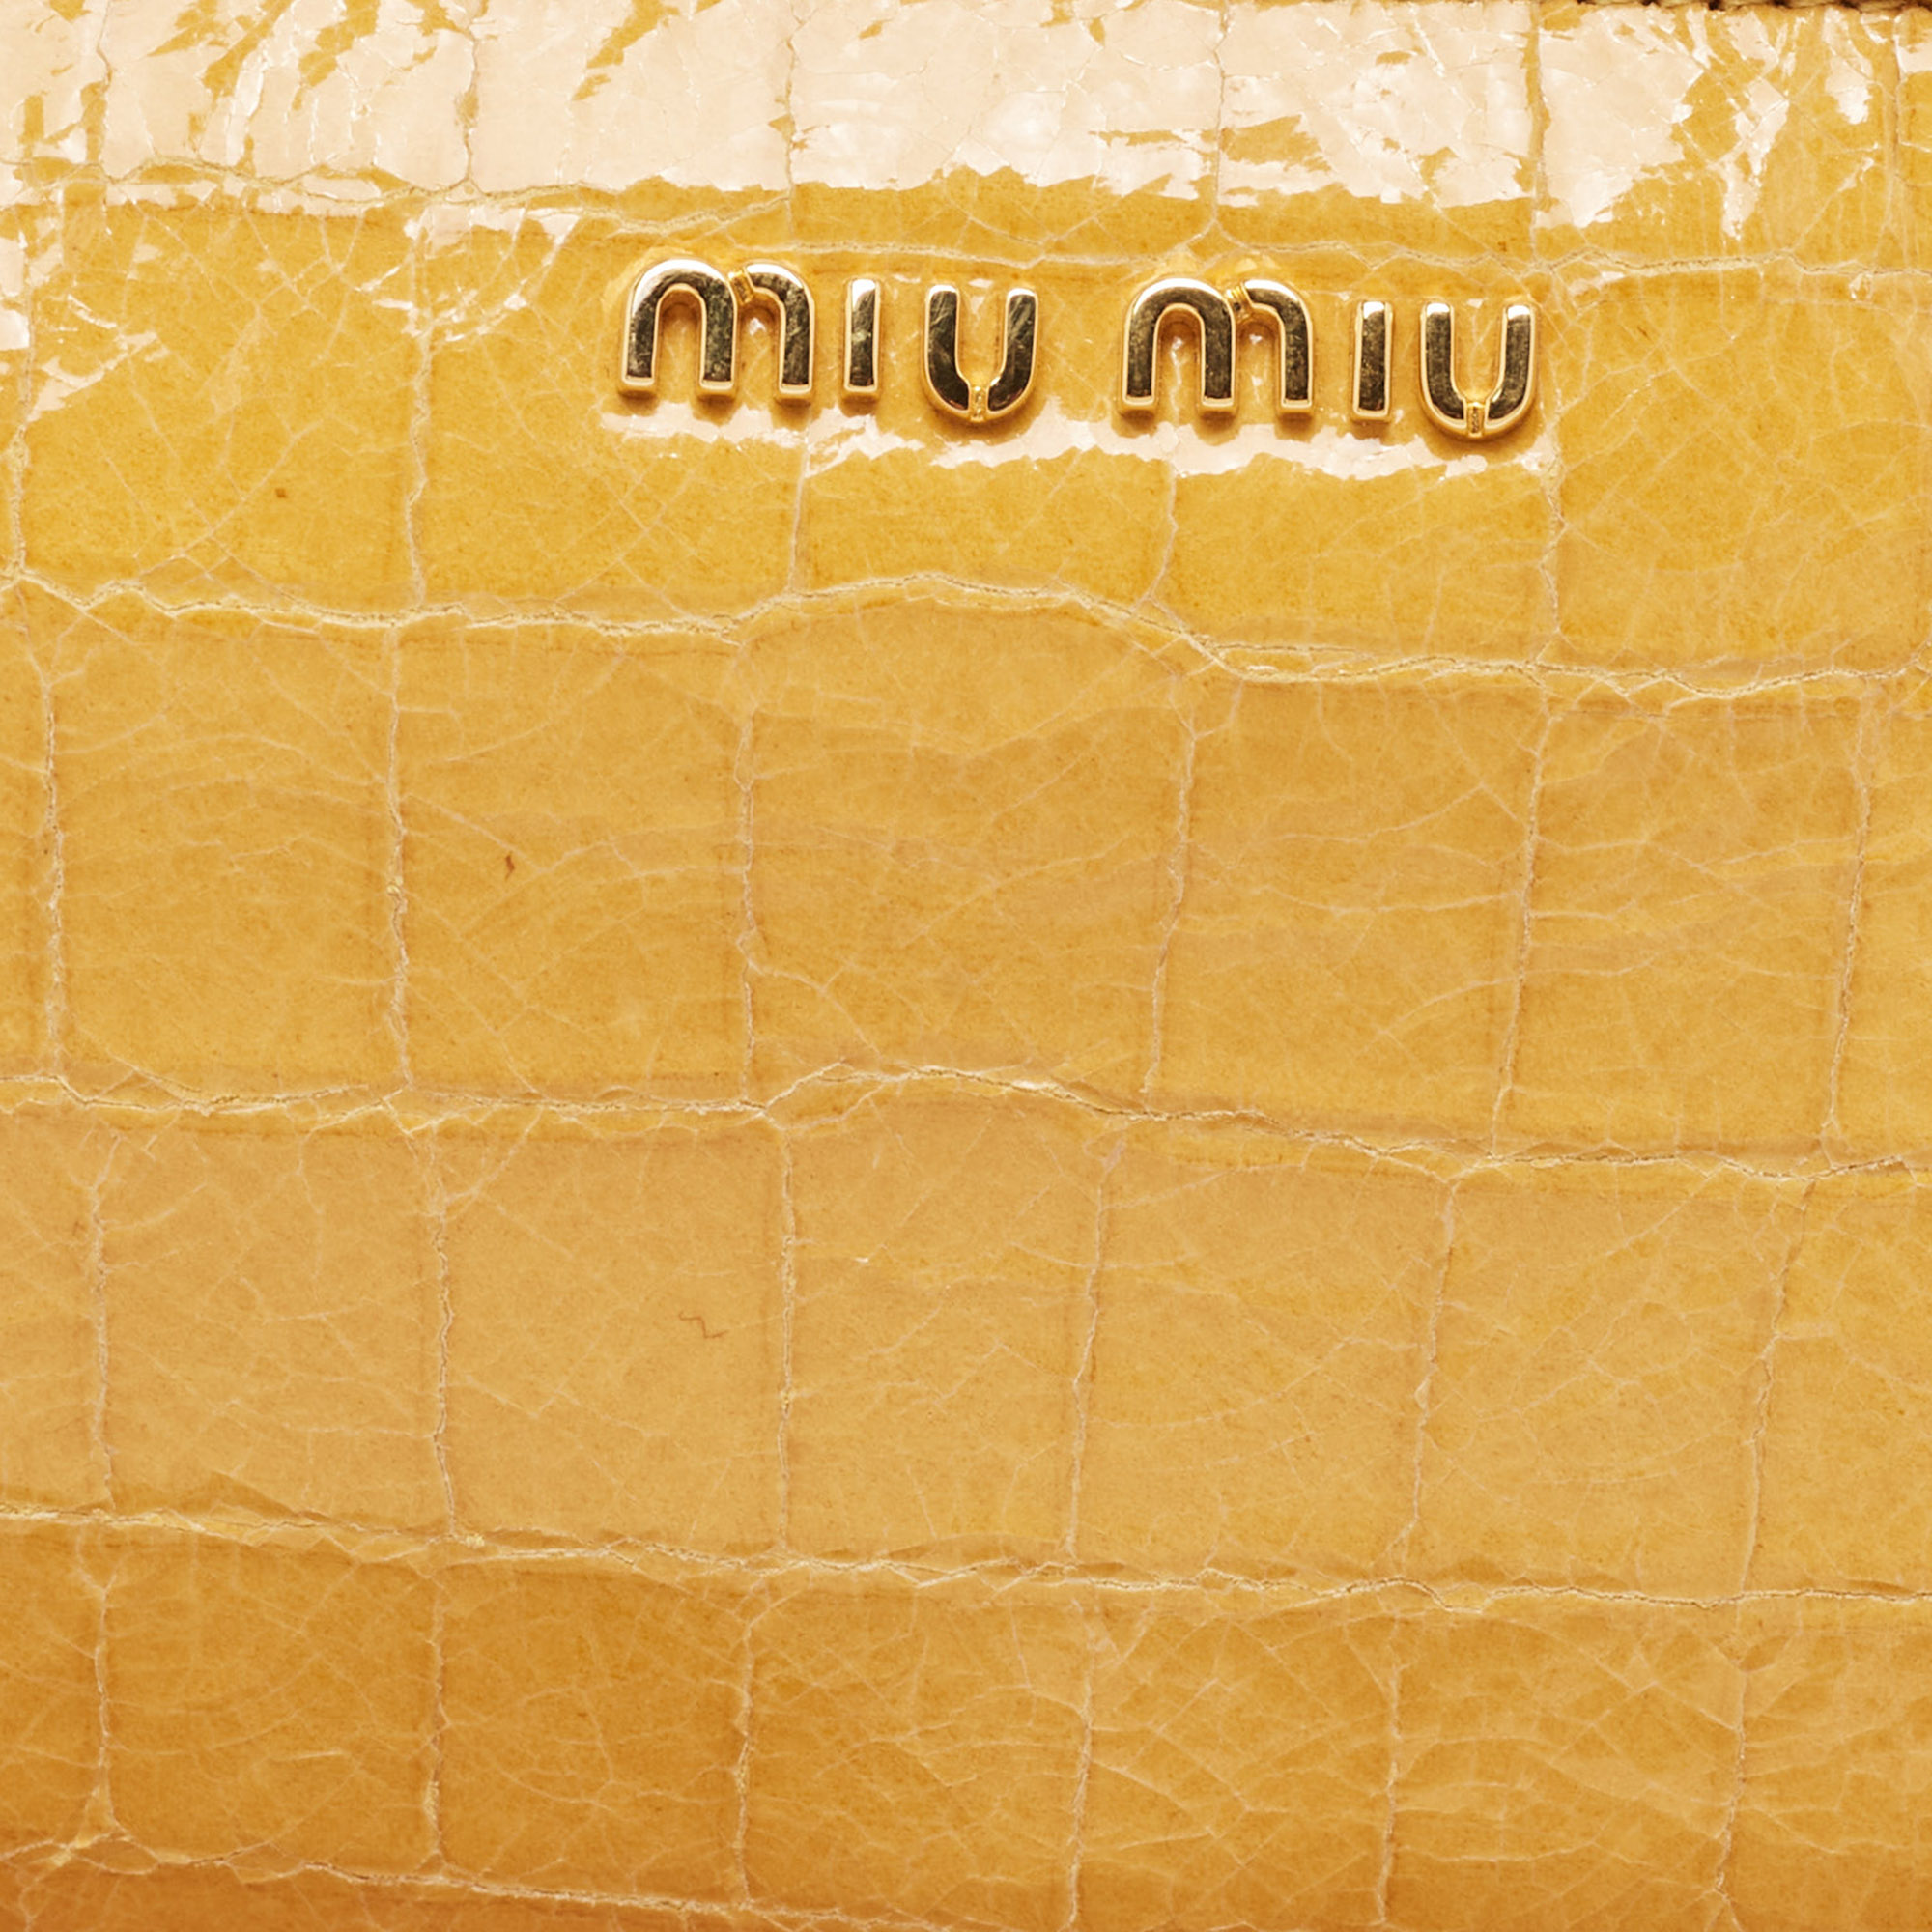 Miu Miu Yellow Croc Embossed Patent Leather Wristlet Pouch